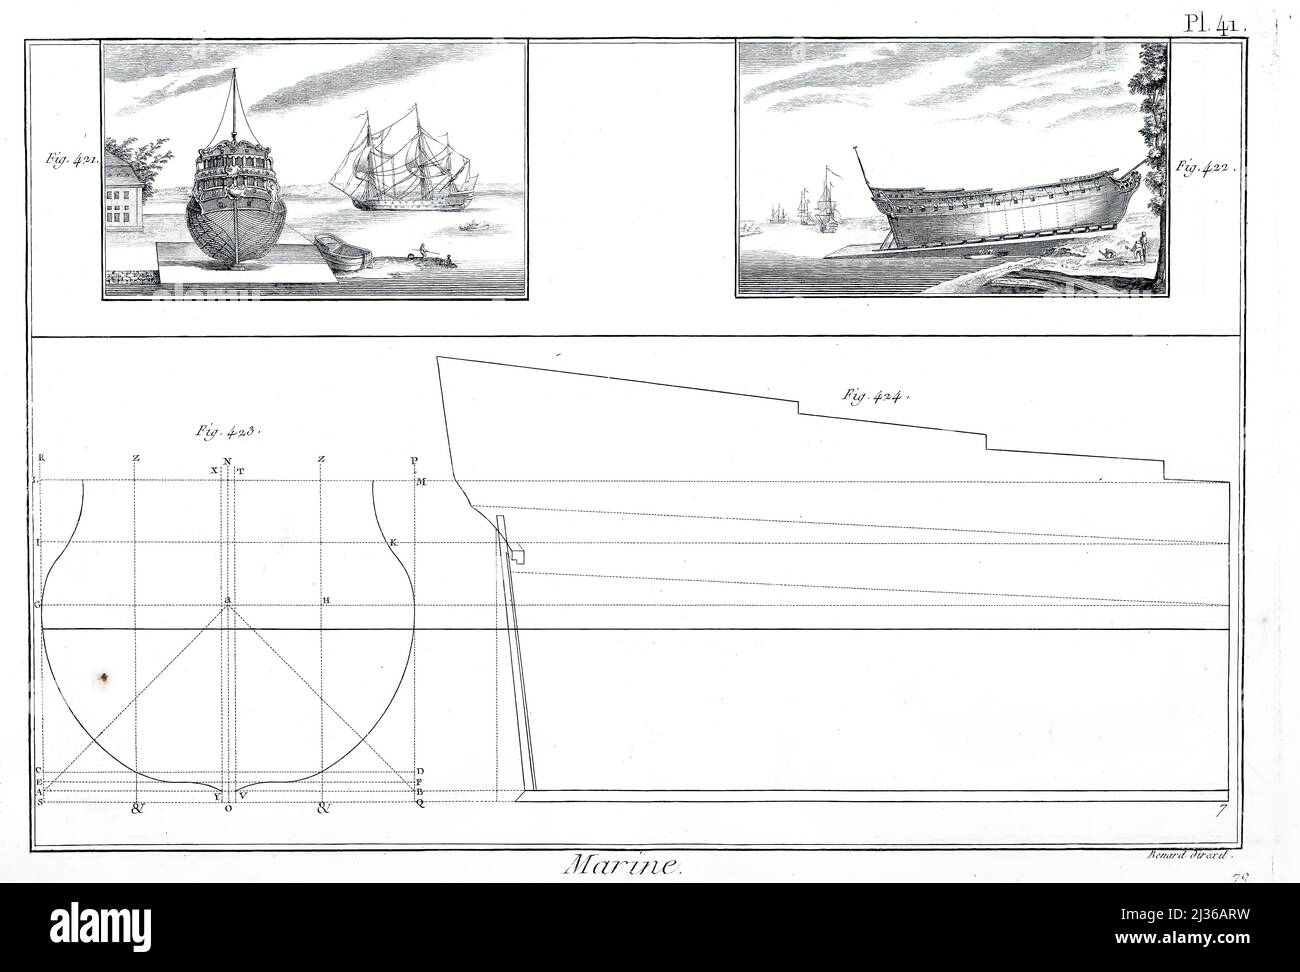 Ship design and blueprints From the Encyclopédie méthodique Maritime Encyclopedia Publisher Paris : Panckoucke ; Liège : Plomteux in 1787 containing drawings and blueprints of shipbuilding,  and Illustrations of maritime subjects plates drawn by Benard direxit Stock Photo